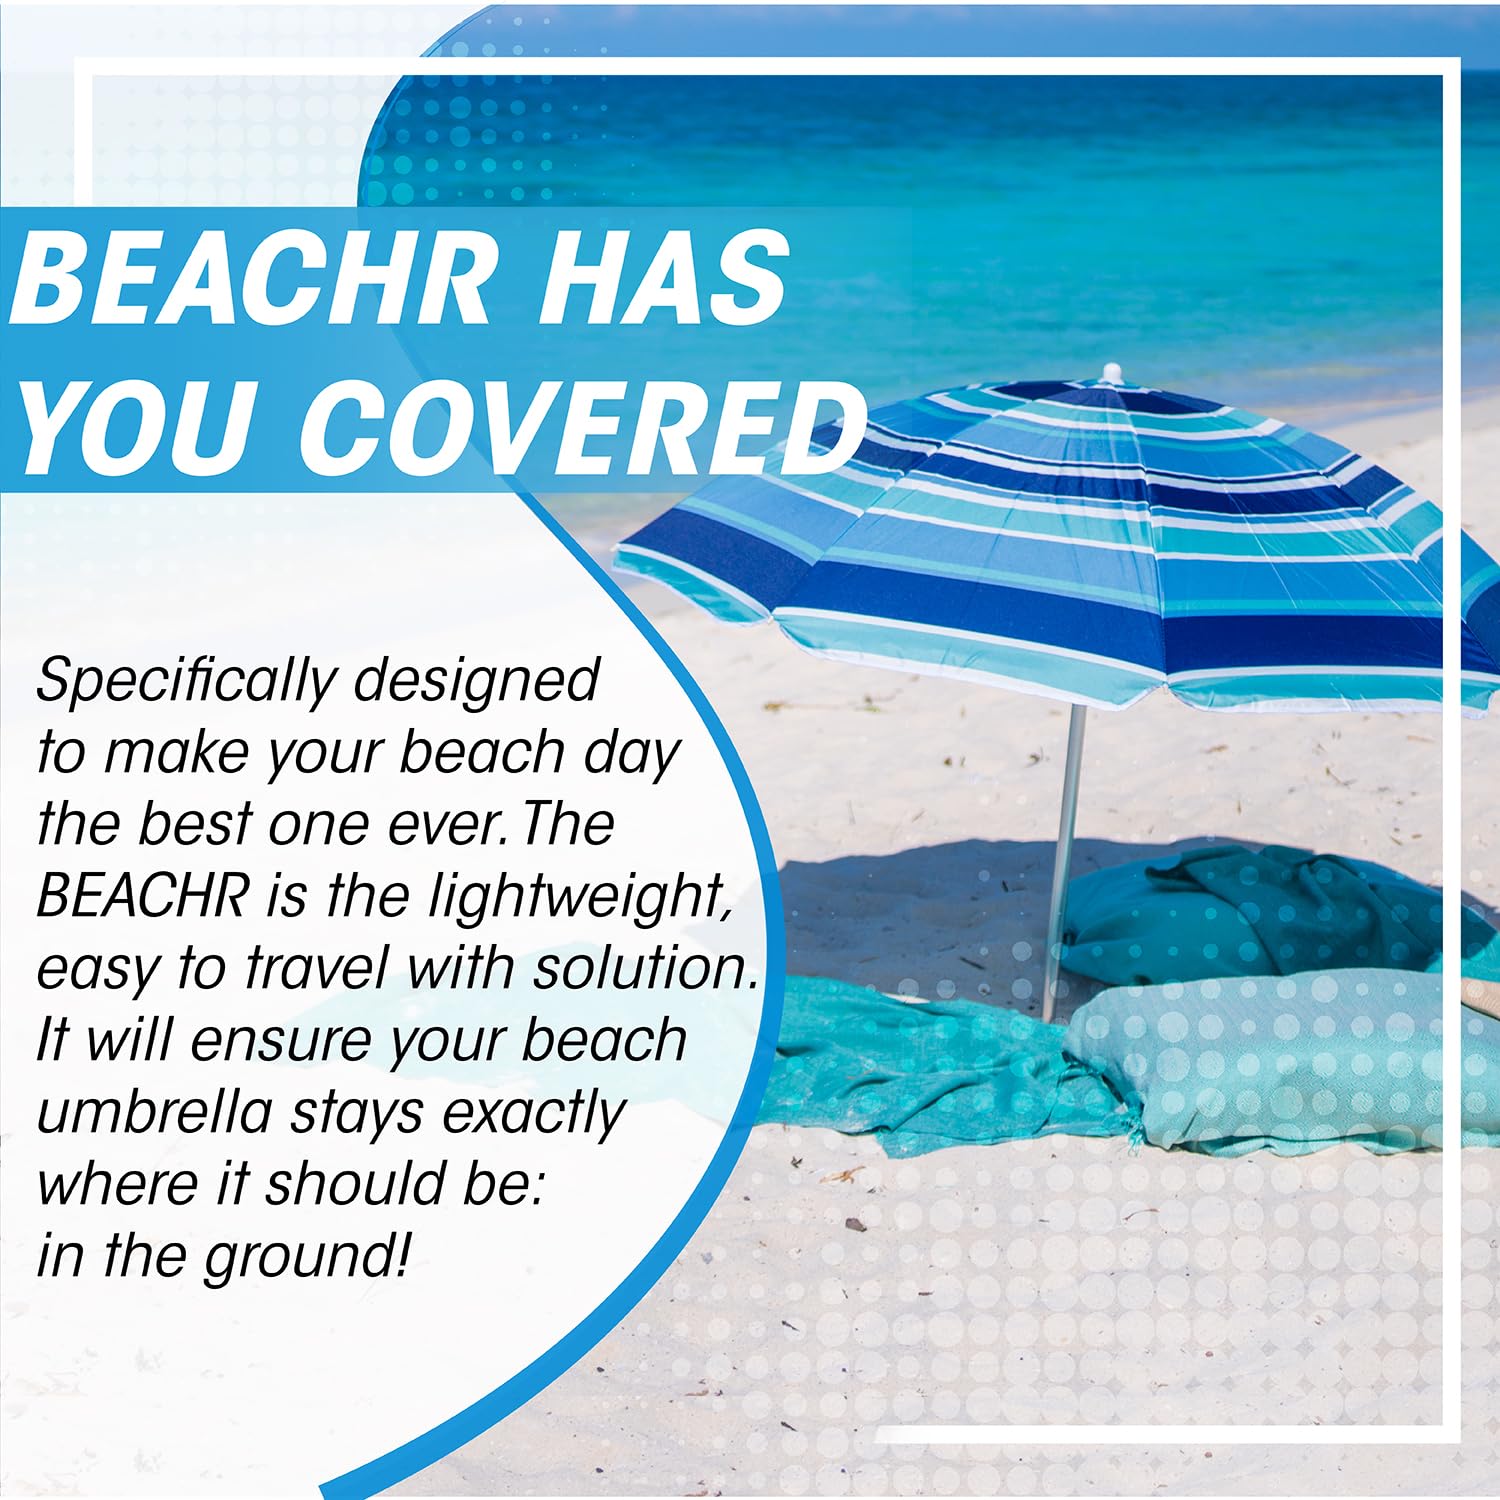 Beachr Beach Umbrella Sand Anchor | Outdoor Umbrella Base with Ground Anchor Screw | Ideal for Sun Protection, Shade, Strong Winds | Universal & One Size Fits All  - Like New